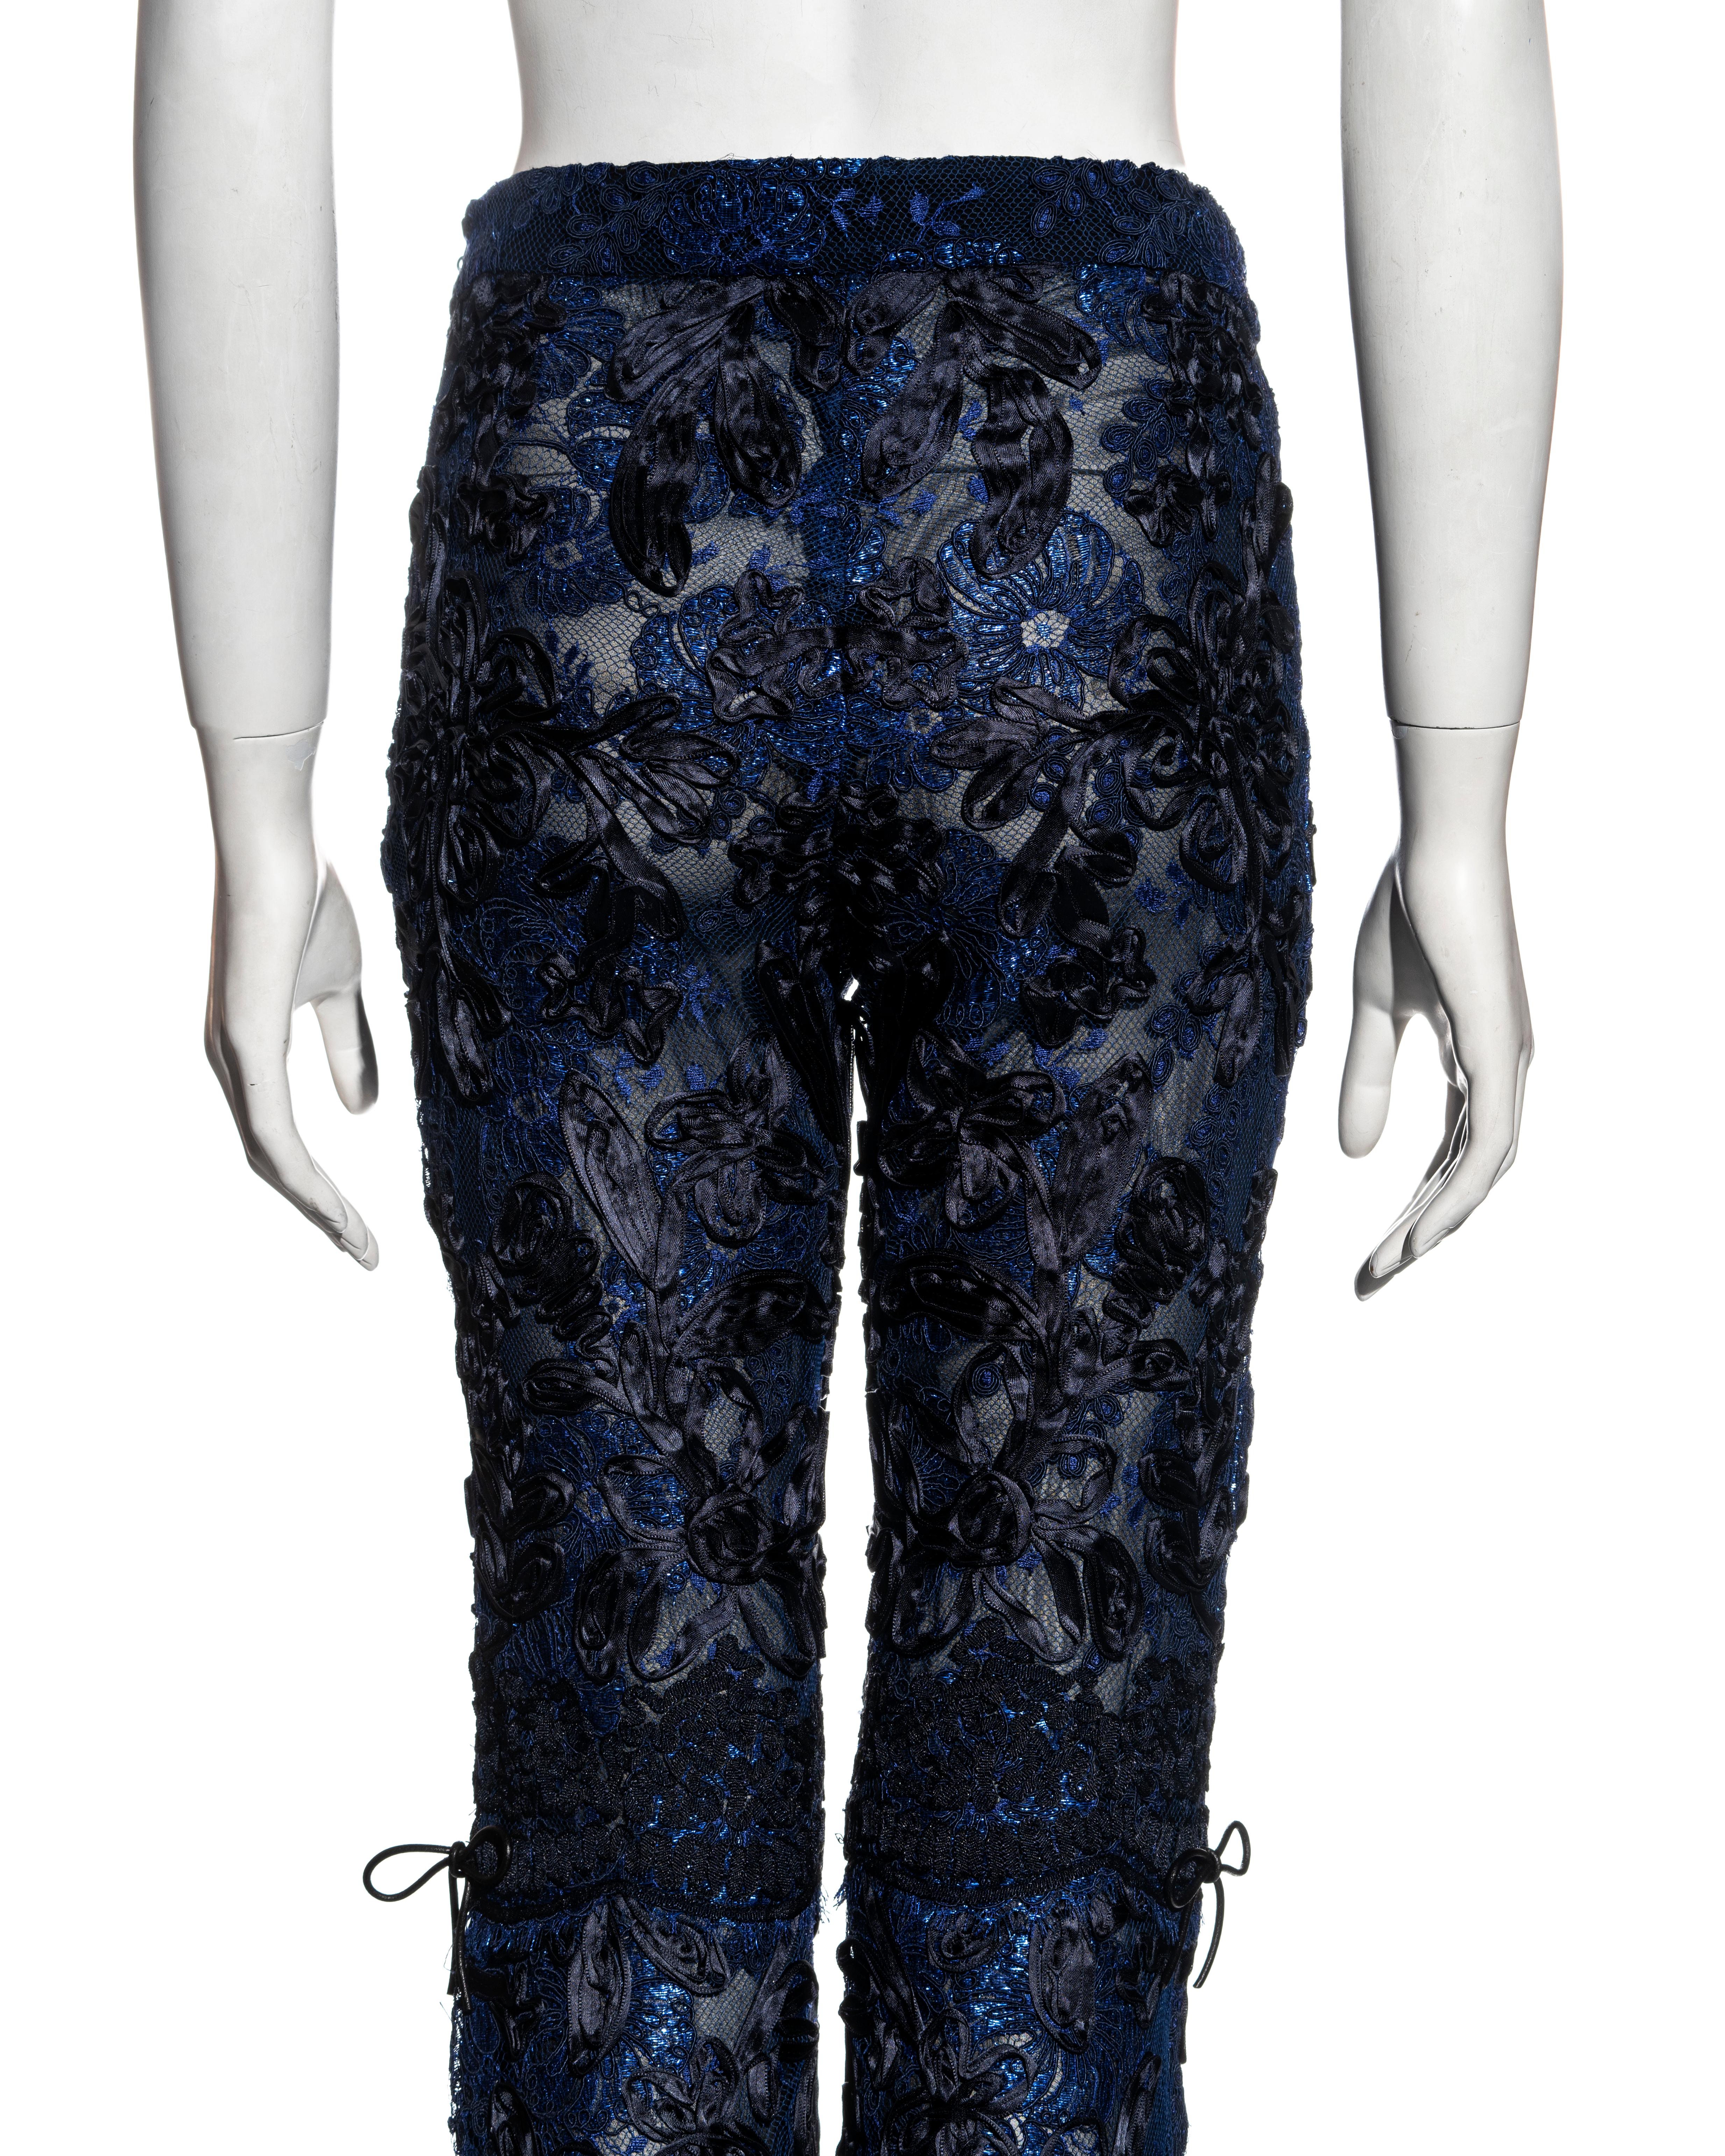 Gucci by Tom Ford blue and black lamé floral lace flared pants, fw 1999 For Sale 5